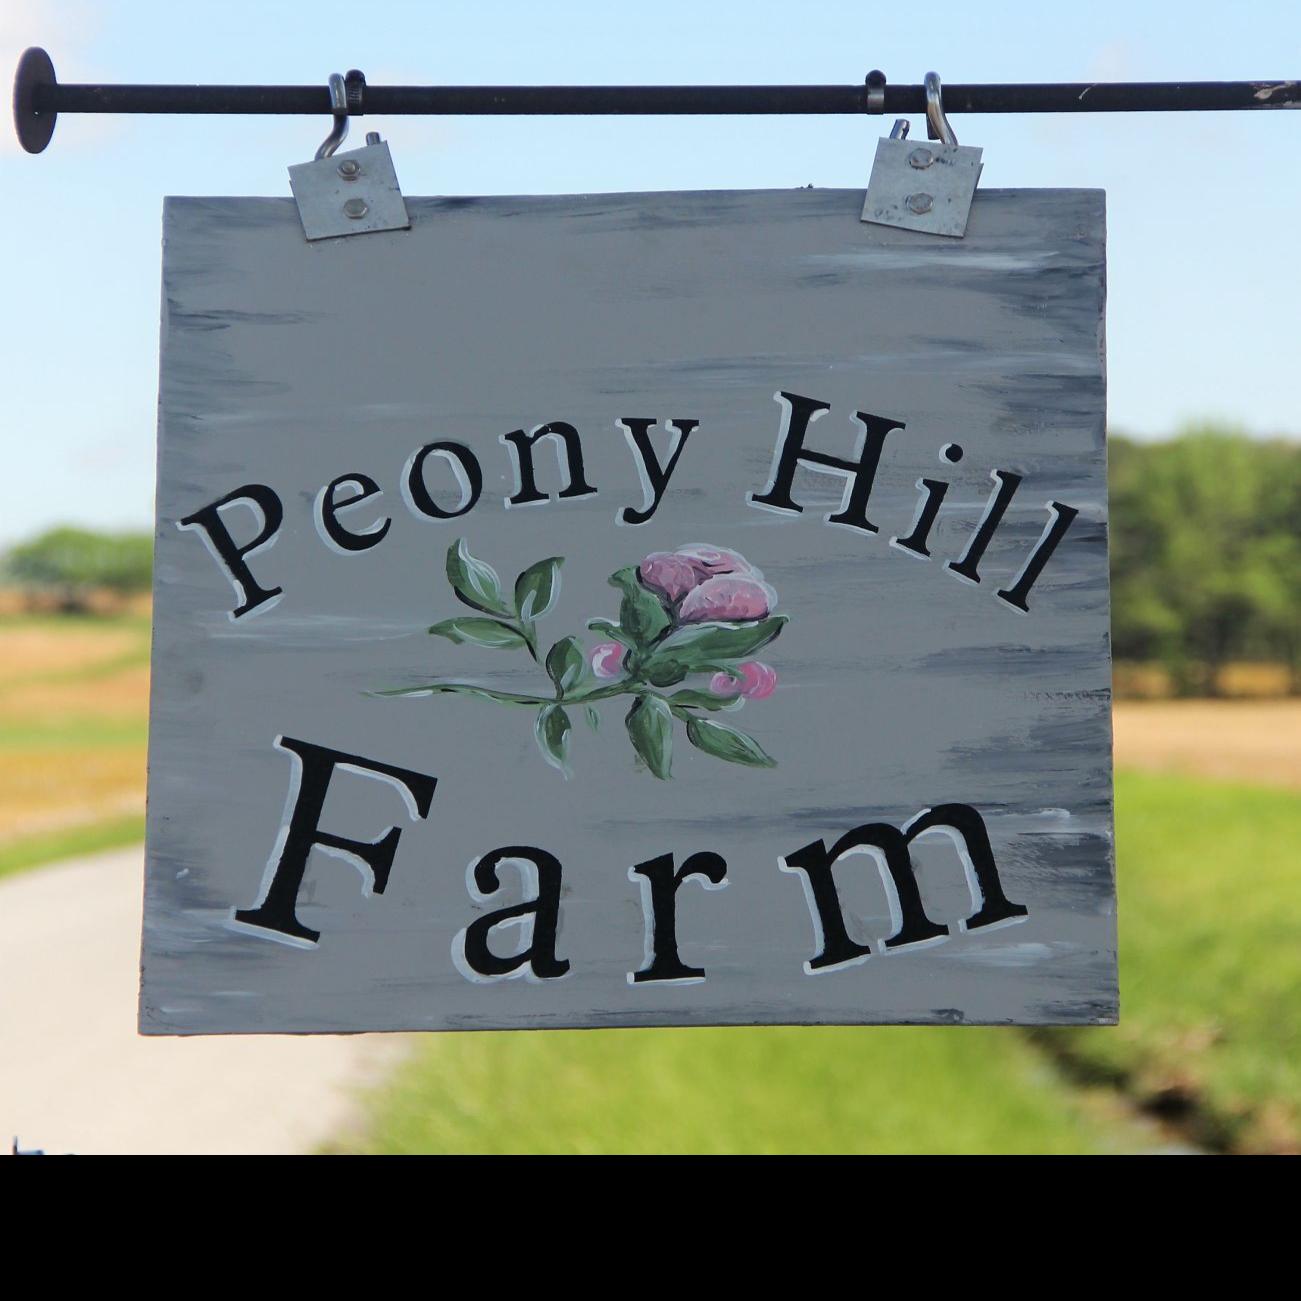 In Our Backyard Peony Hill Farm A Growing Business In Southern Illinois Life Style Magazine Thesouthern Com